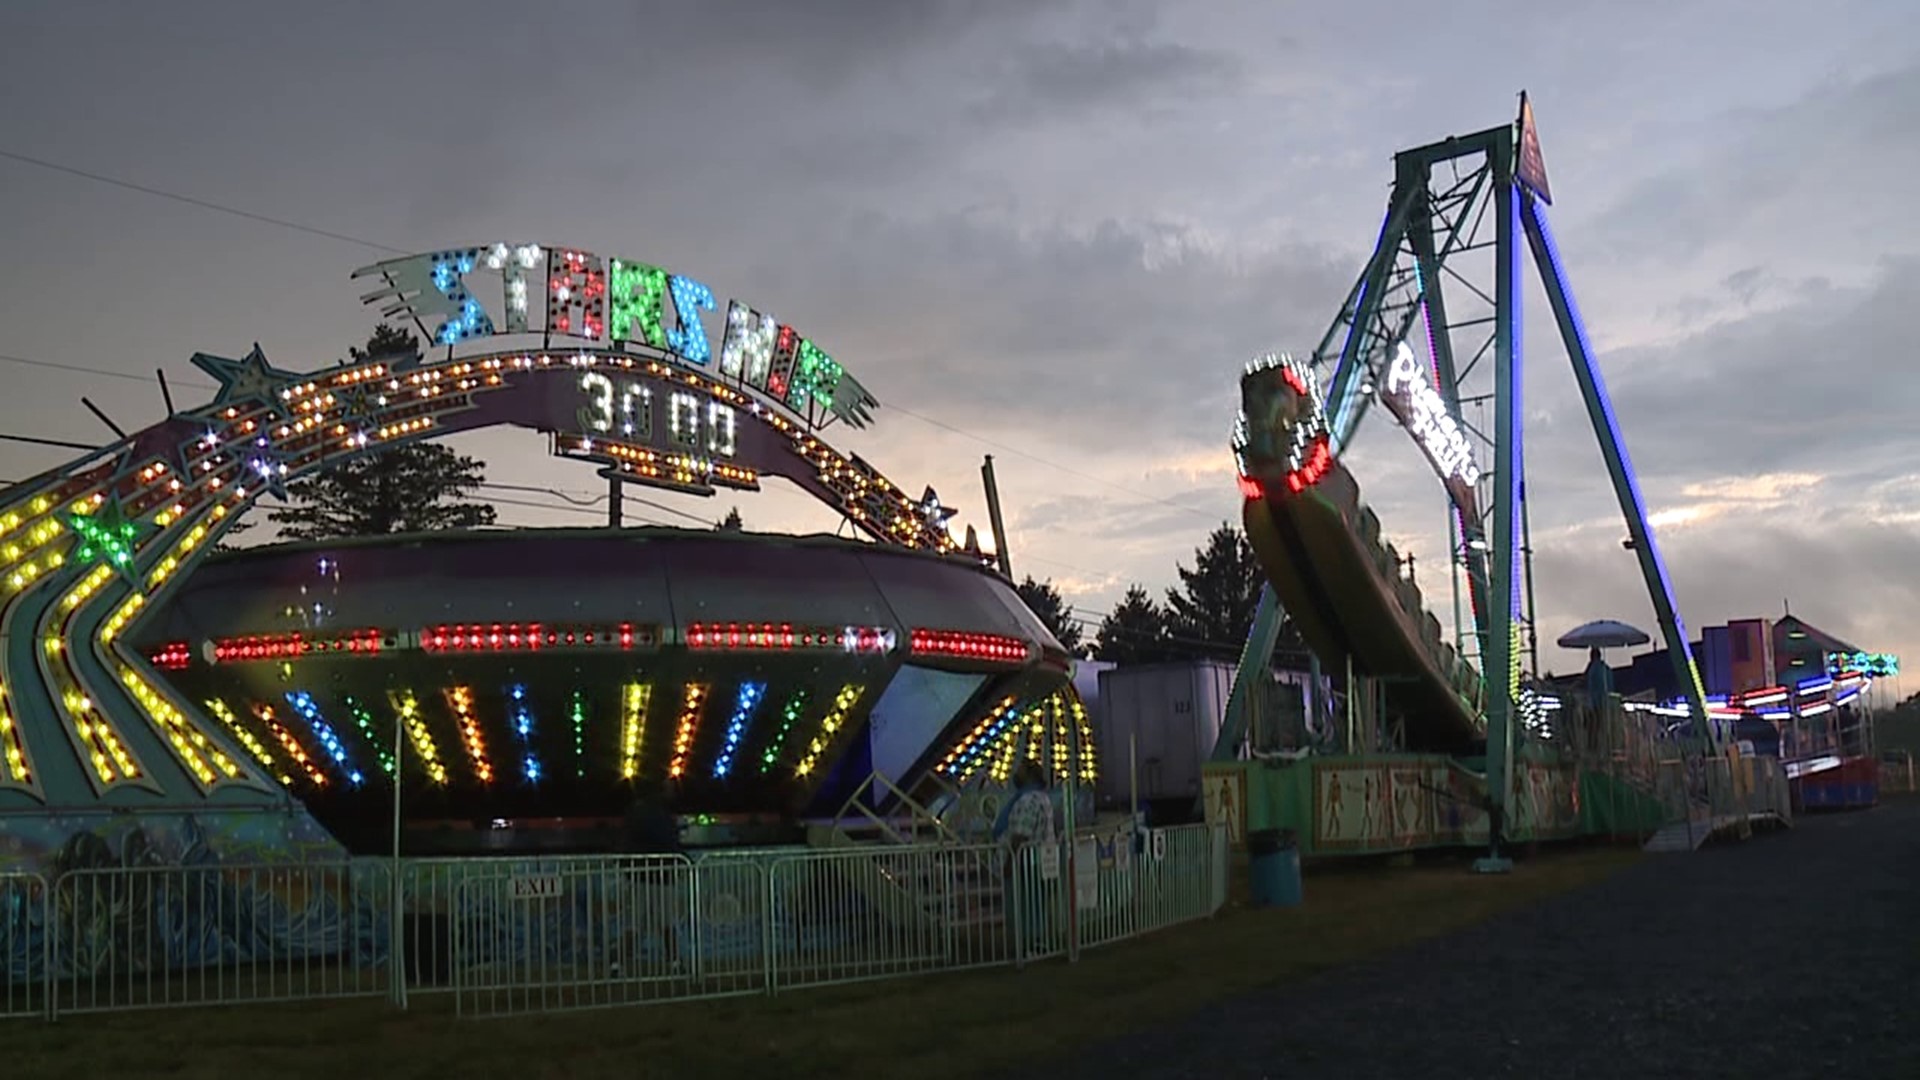 Despite the wet weather and inflationary pressure, fairgoers and organizers are celebrating a remarkable milestone.